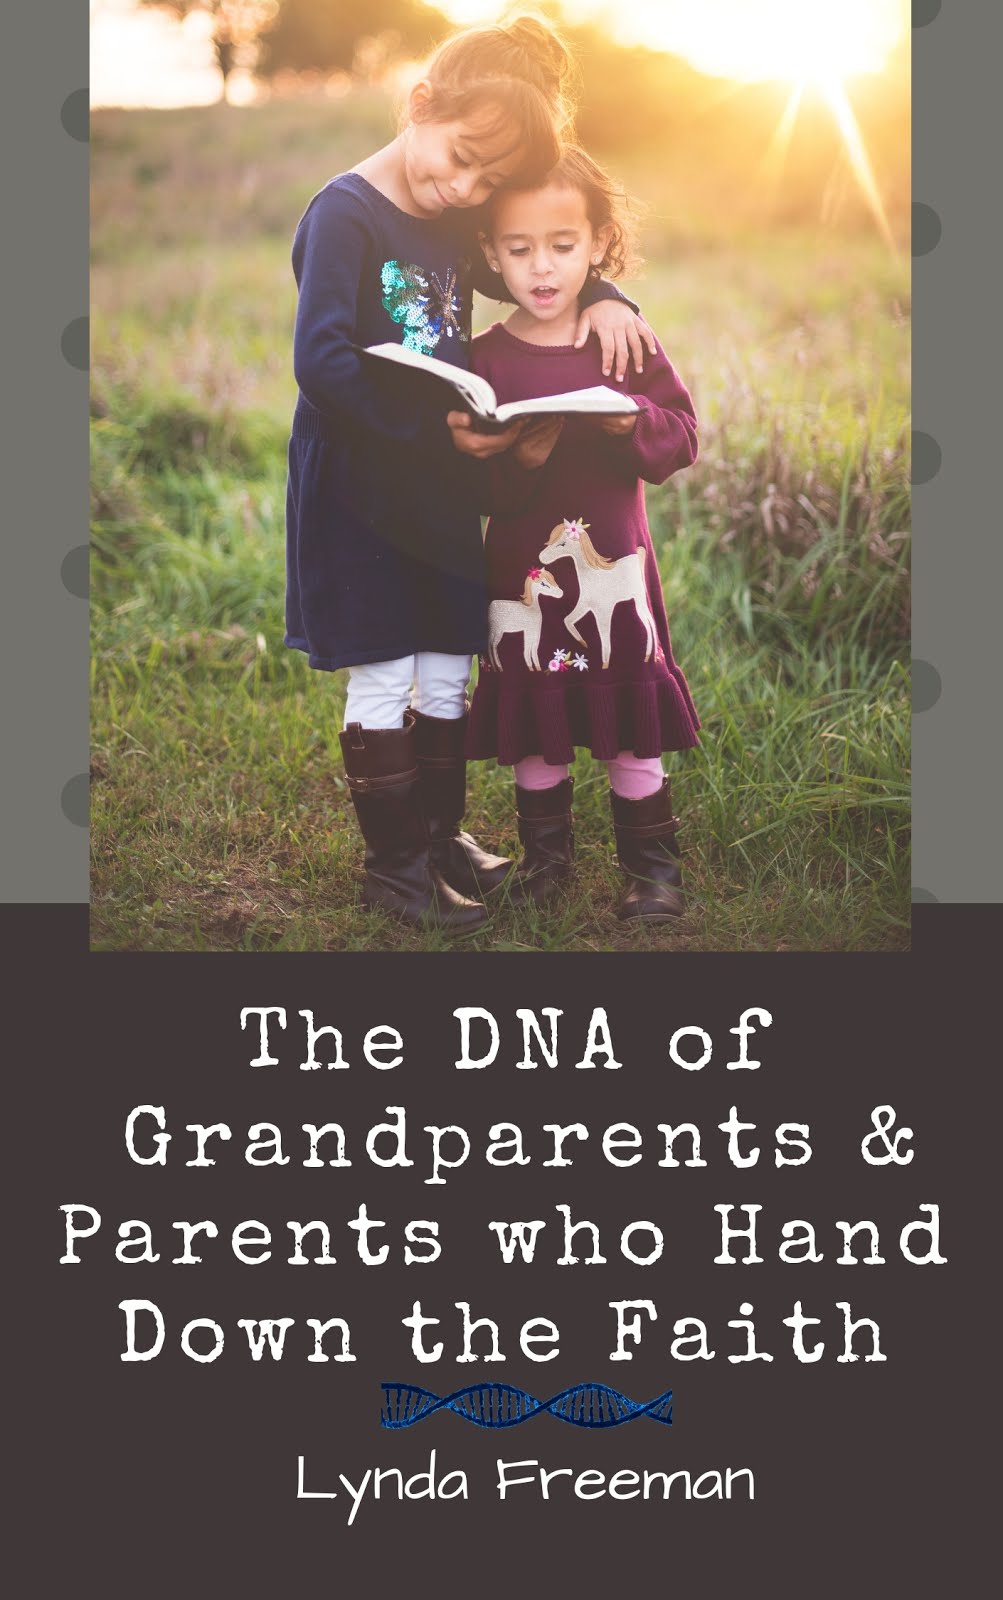 The DNA of Grandparents & Parents Who Hand Down the Faith